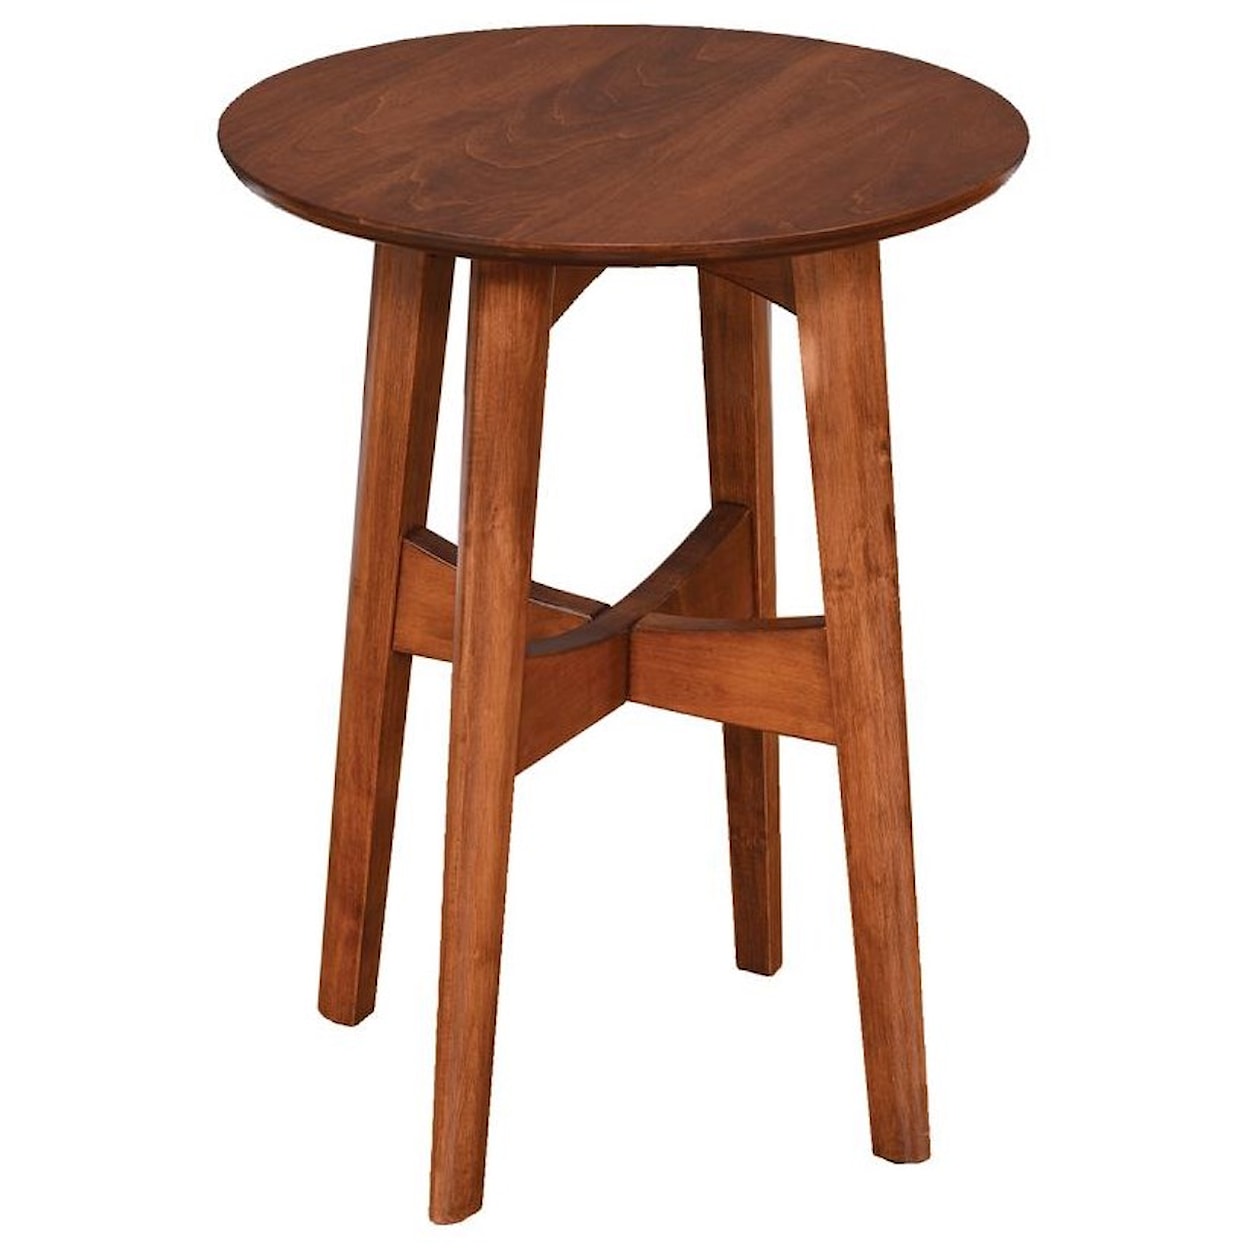 Hopewood Lodi Round End Table